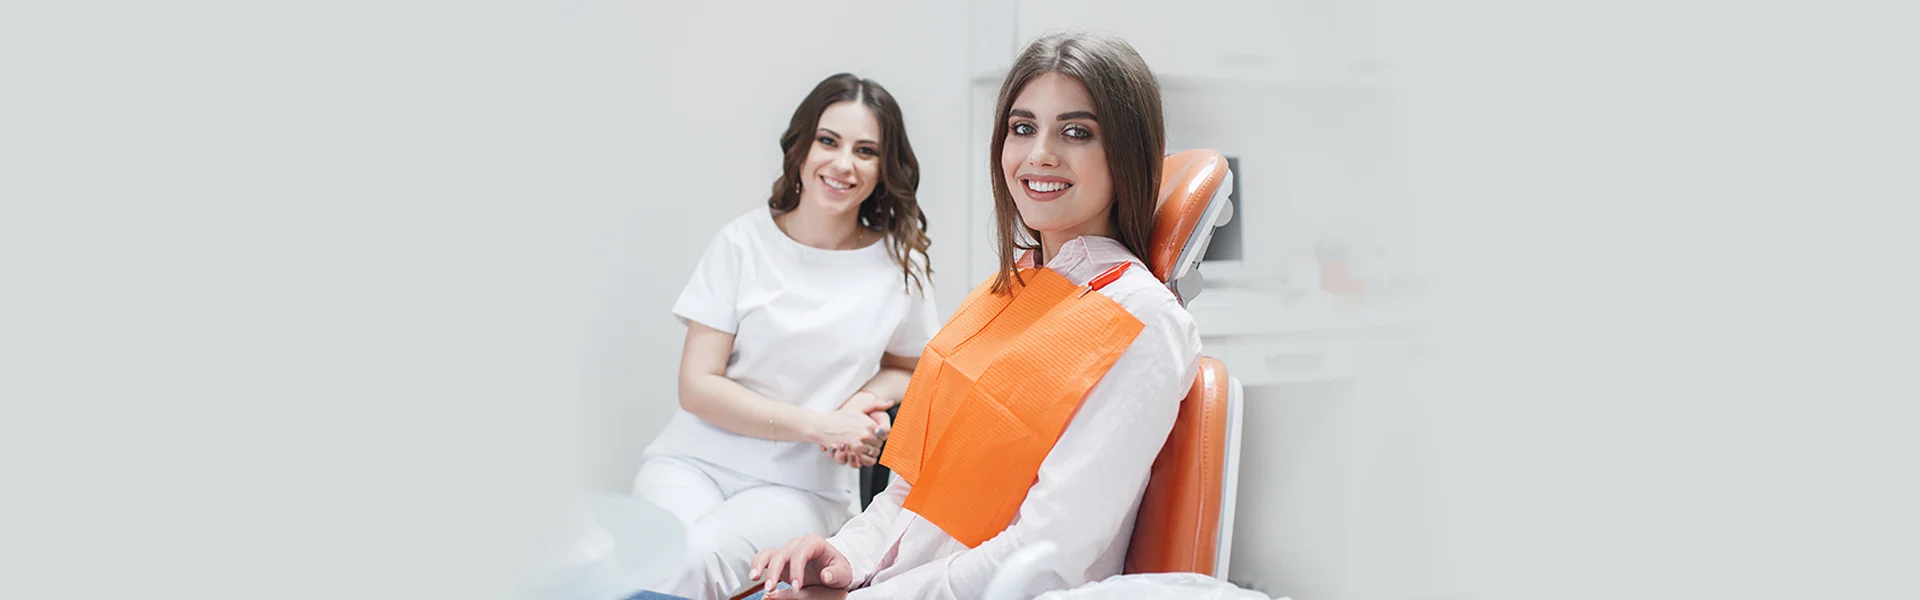 How Root Canal Therapy Can Save You Time and Money in the Long Run